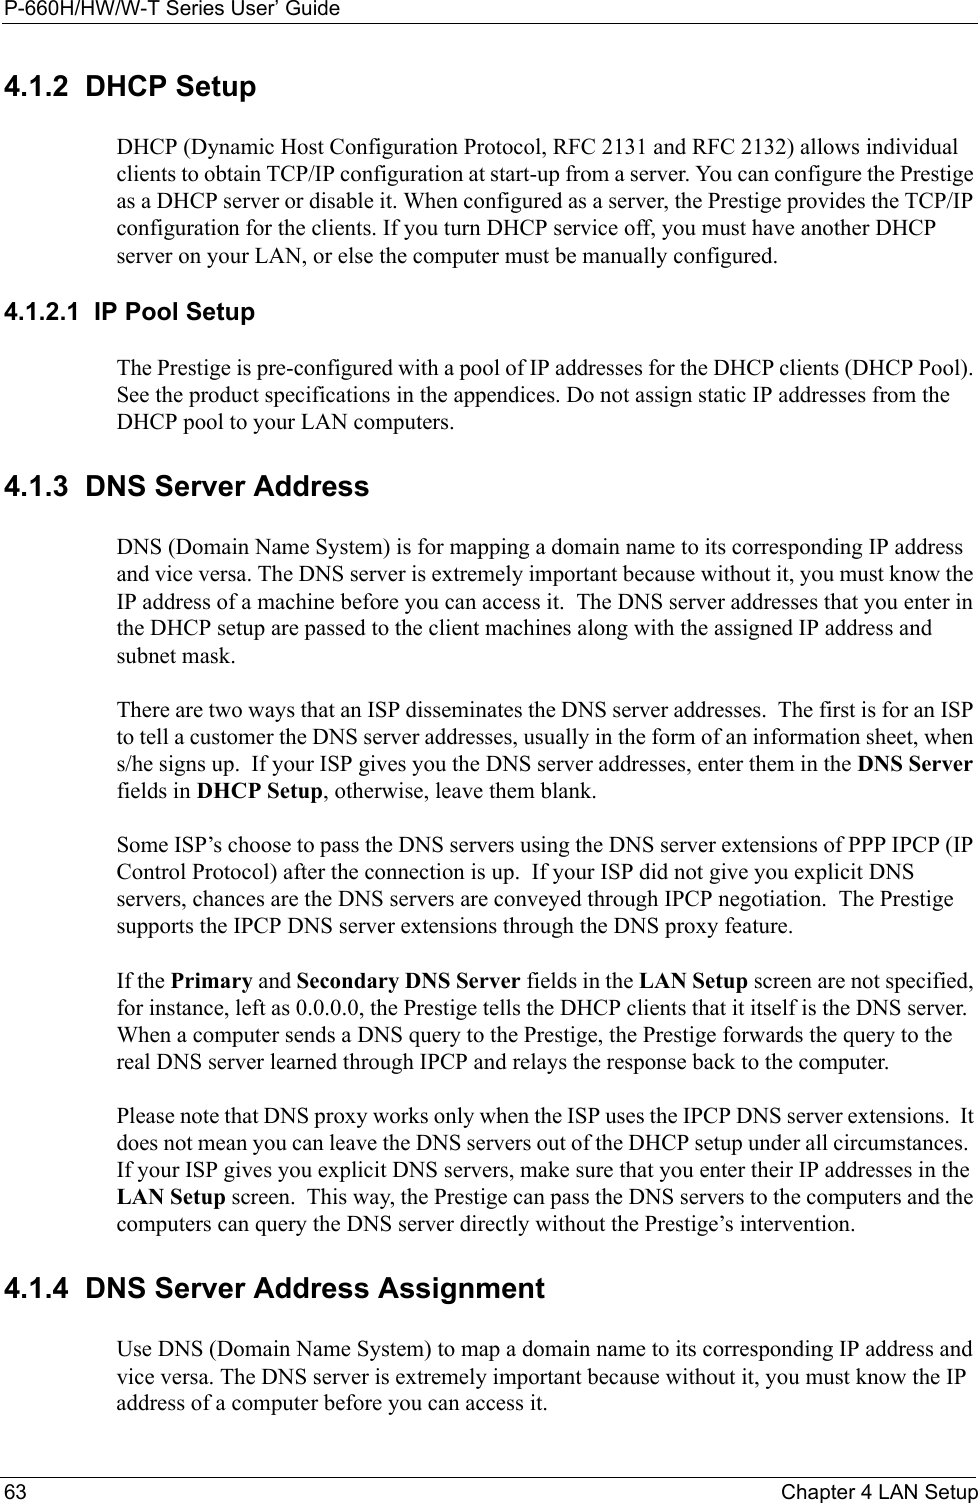 P-660H/HW/W-T Series User’ Guide63 Chapter 4 LAN Setup4.1.2  DHCP SetupDHCP (Dynamic Host Configuration Protocol, RFC 2131 and RFC 2132) allows individual clients to obtain TCP/IP configuration at start-up from a server. You can configure the Prestige as a DHCP server or disable it. When configured as a server, the Prestige provides the TCP/IP configuration for the clients. If you turn DHCP service off, you must have another DHCP server on your LAN, or else the computer must be manually configured. 4.1.2.1  IP Pool SetupThe Prestige is pre-configured with a pool of IP addresses for the DHCP clients (DHCP Pool). See the product specifications in the appendices. Do not assign static IP addresses from the DHCP pool to your LAN computers.4.1.3  DNS Server AddressDNS (Domain Name System) is for mapping a domain name to its corresponding IP address and vice versa. The DNS server is extremely important because without it, you must know the IP address of a machine before you can access it.  The DNS server addresses that you enter in the DHCP setup are passed to the client machines along with the assigned IP address and subnet mask.There are two ways that an ISP disseminates the DNS server addresses.  The first is for an ISP to tell a customer the DNS server addresses, usually in the form of an information sheet, when s/he signs up.  If your ISP gives you the DNS server addresses, enter them in the DNS Server fields in DHCP Setup, otherwise, leave them blank.Some ISP’s choose to pass the DNS servers using the DNS server extensions of PPP IPCP (IP Control Protocol) after the connection is up.  If your ISP did not give you explicit DNS servers, chances are the DNS servers are conveyed through IPCP negotiation.  The Prestige supports the IPCP DNS server extensions through the DNS proxy feature.If the Primary and Secondary DNS Server fields in the LAN Setup screen are not specified, for instance, left as 0.0.0.0, the Prestige tells the DHCP clients that it itself is the DNS server.  When a computer sends a DNS query to the Prestige, the Prestige forwards the query to the real DNS server learned through IPCP and relays the response back to the computer.Please note that DNS proxy works only when the ISP uses the IPCP DNS server extensions.  It does not mean you can leave the DNS servers out of the DHCP setup under all circumstances.  If your ISP gives you explicit DNS servers, make sure that you enter their IP addresses in the LAN Setup screen.  This way, the Prestige can pass the DNS servers to the computers and the computers can query the DNS server directly without the Prestige’s intervention.4.1.4  DNS Server Address AssignmentUse DNS (Domain Name System) to map a domain name to its corresponding IP address and vice versa. The DNS server is extremely important because without it, you must know the IP address of a computer before you can access it. 